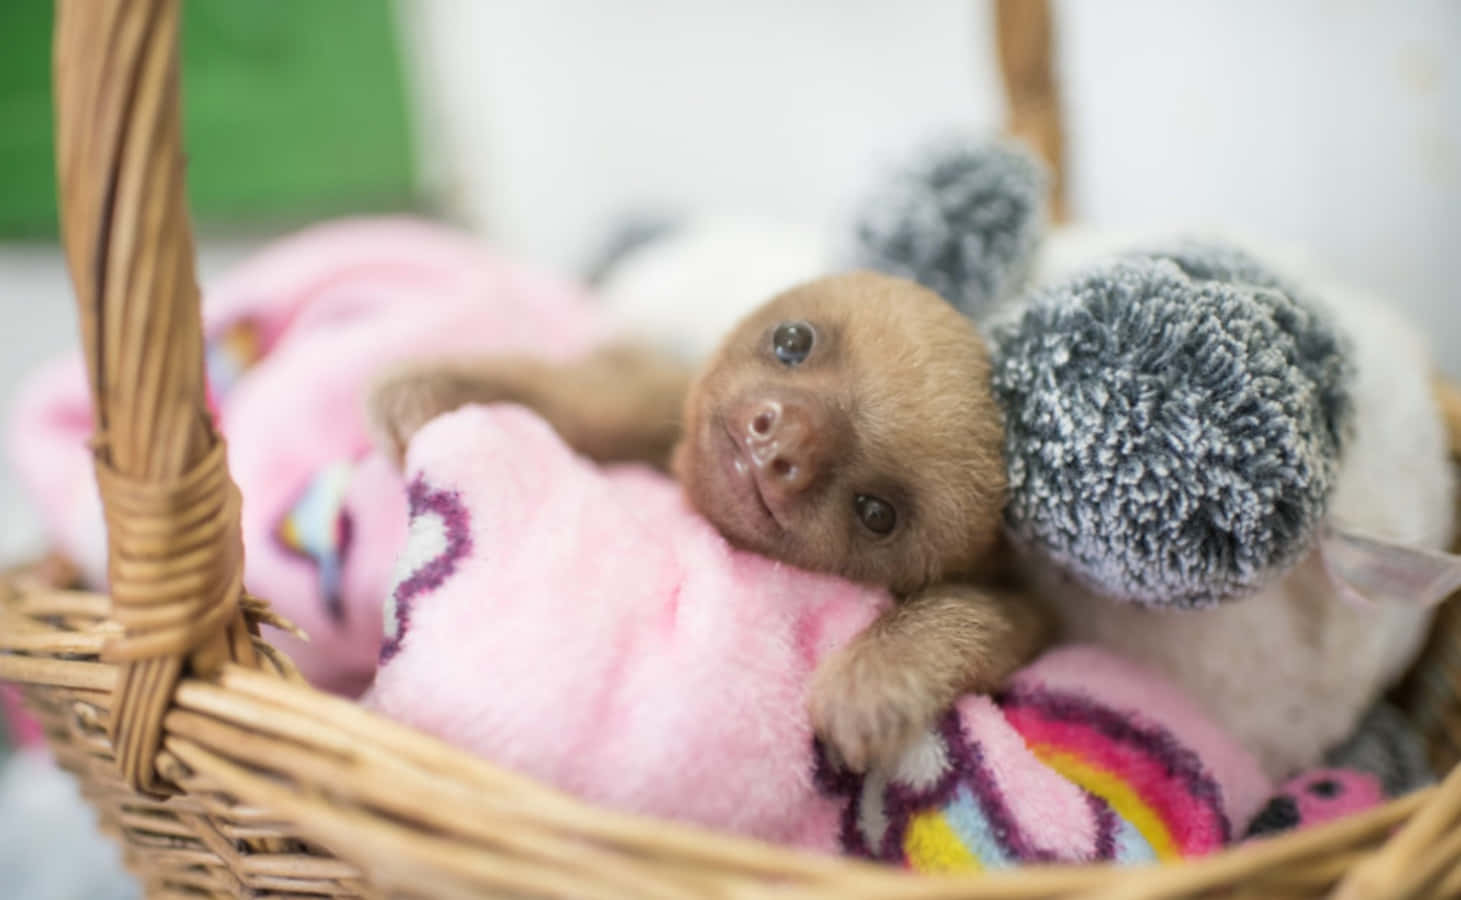 Cute Sloth In Basket Picture